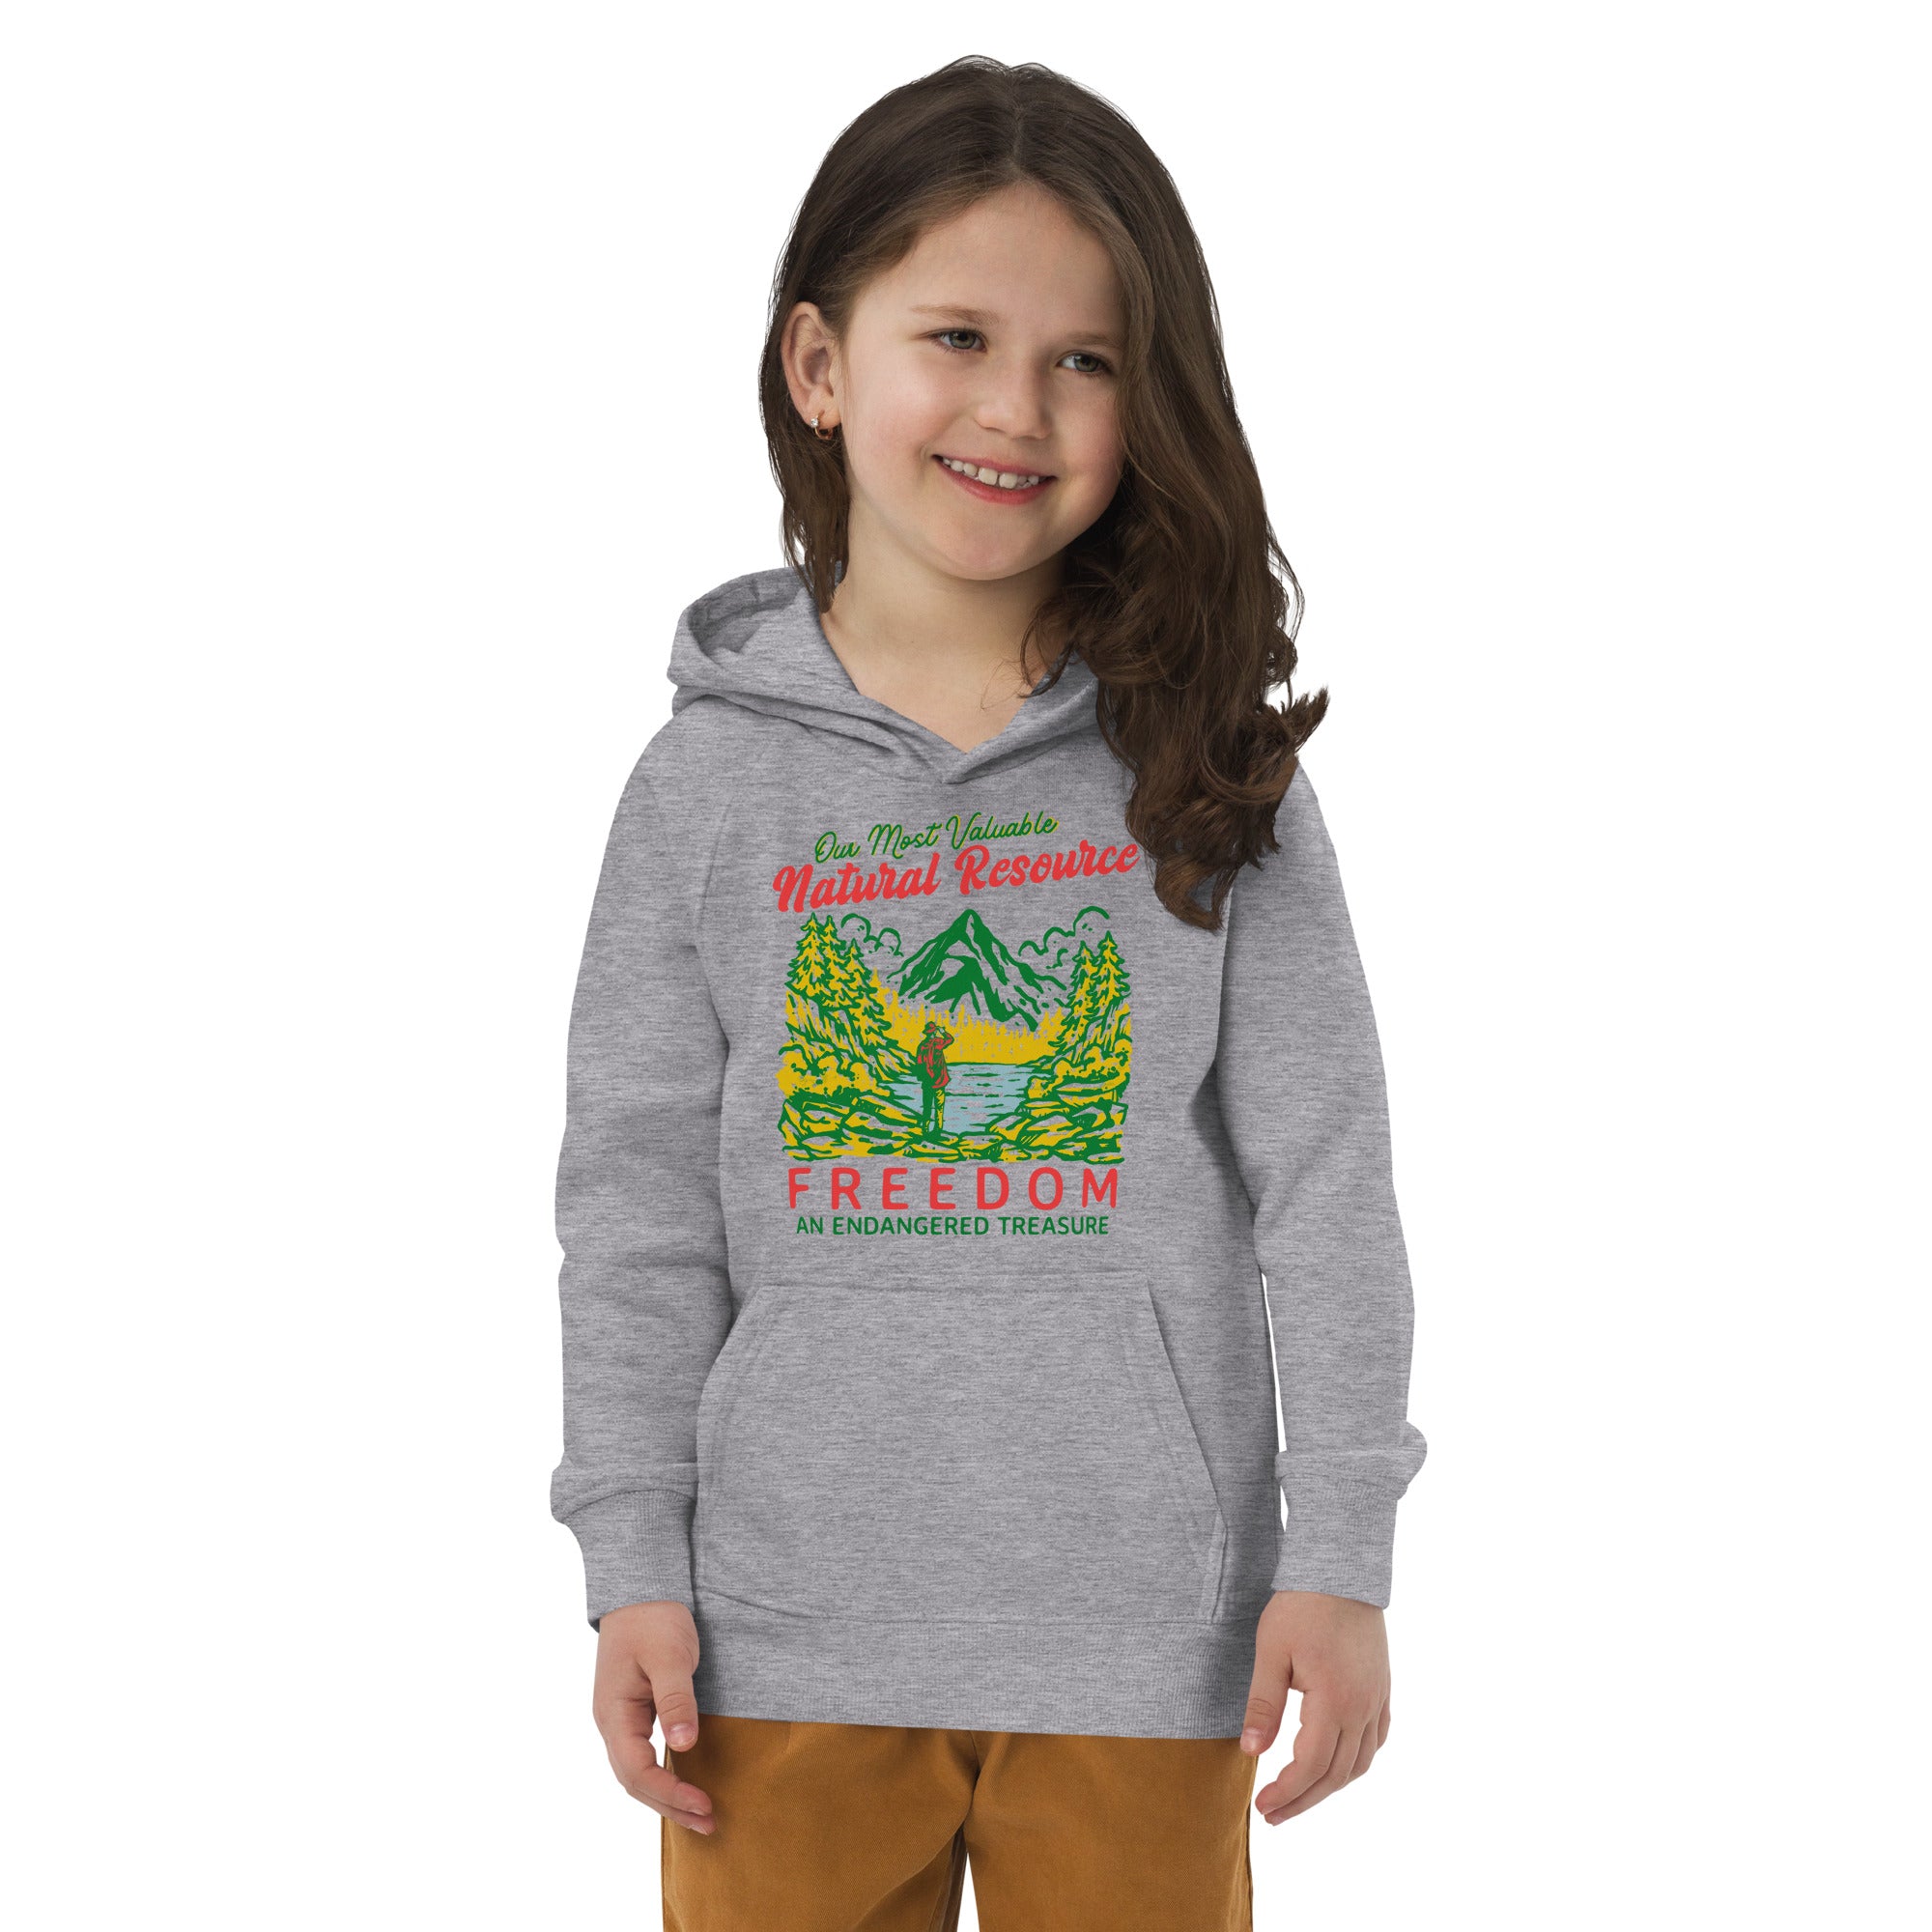 Freedom Our Most Valuable Natural Resource Kids Eco Hoodie